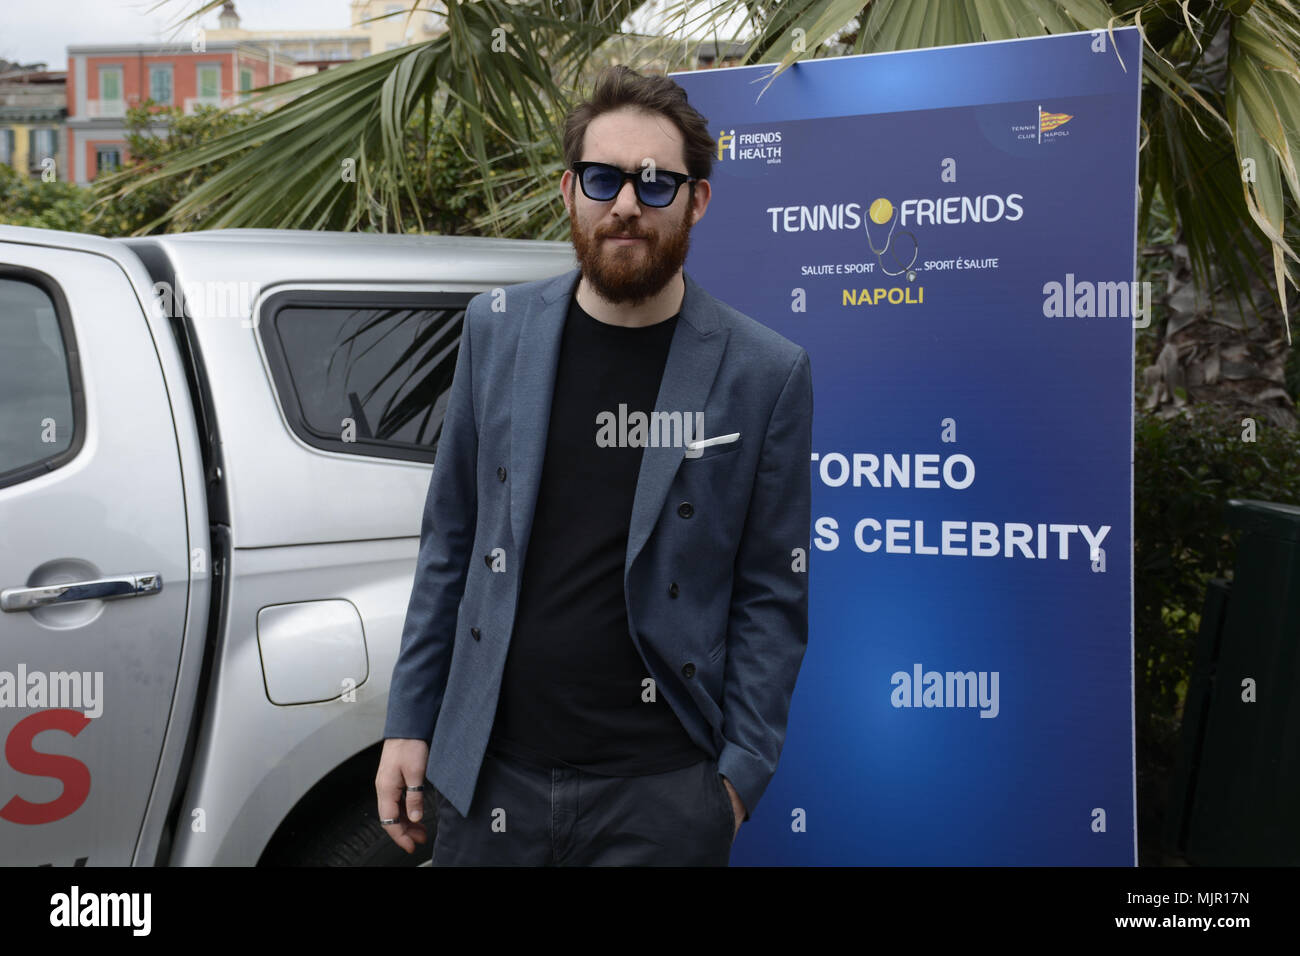 Naples, Italy. 05 May, 2018. Maldestro also know as Antonio Prestieri, the italian songwriter at the event 'Tennis and Friends' a national event, founded in 2011 on the initiative of Friends For Health for the prevention and promotion of health. Stock Photo